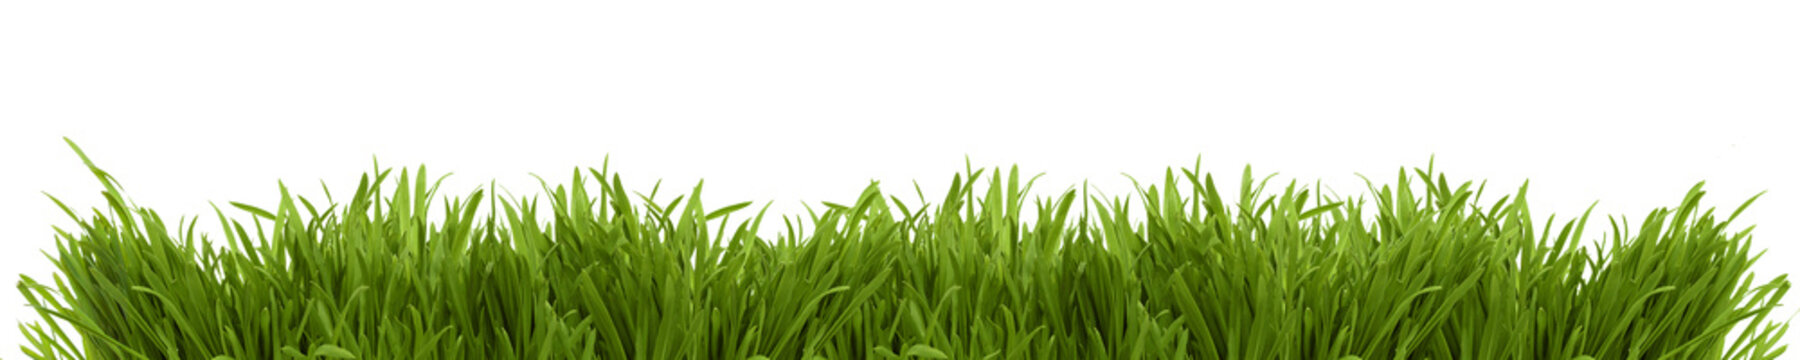 Wide image of a fresh spring grass